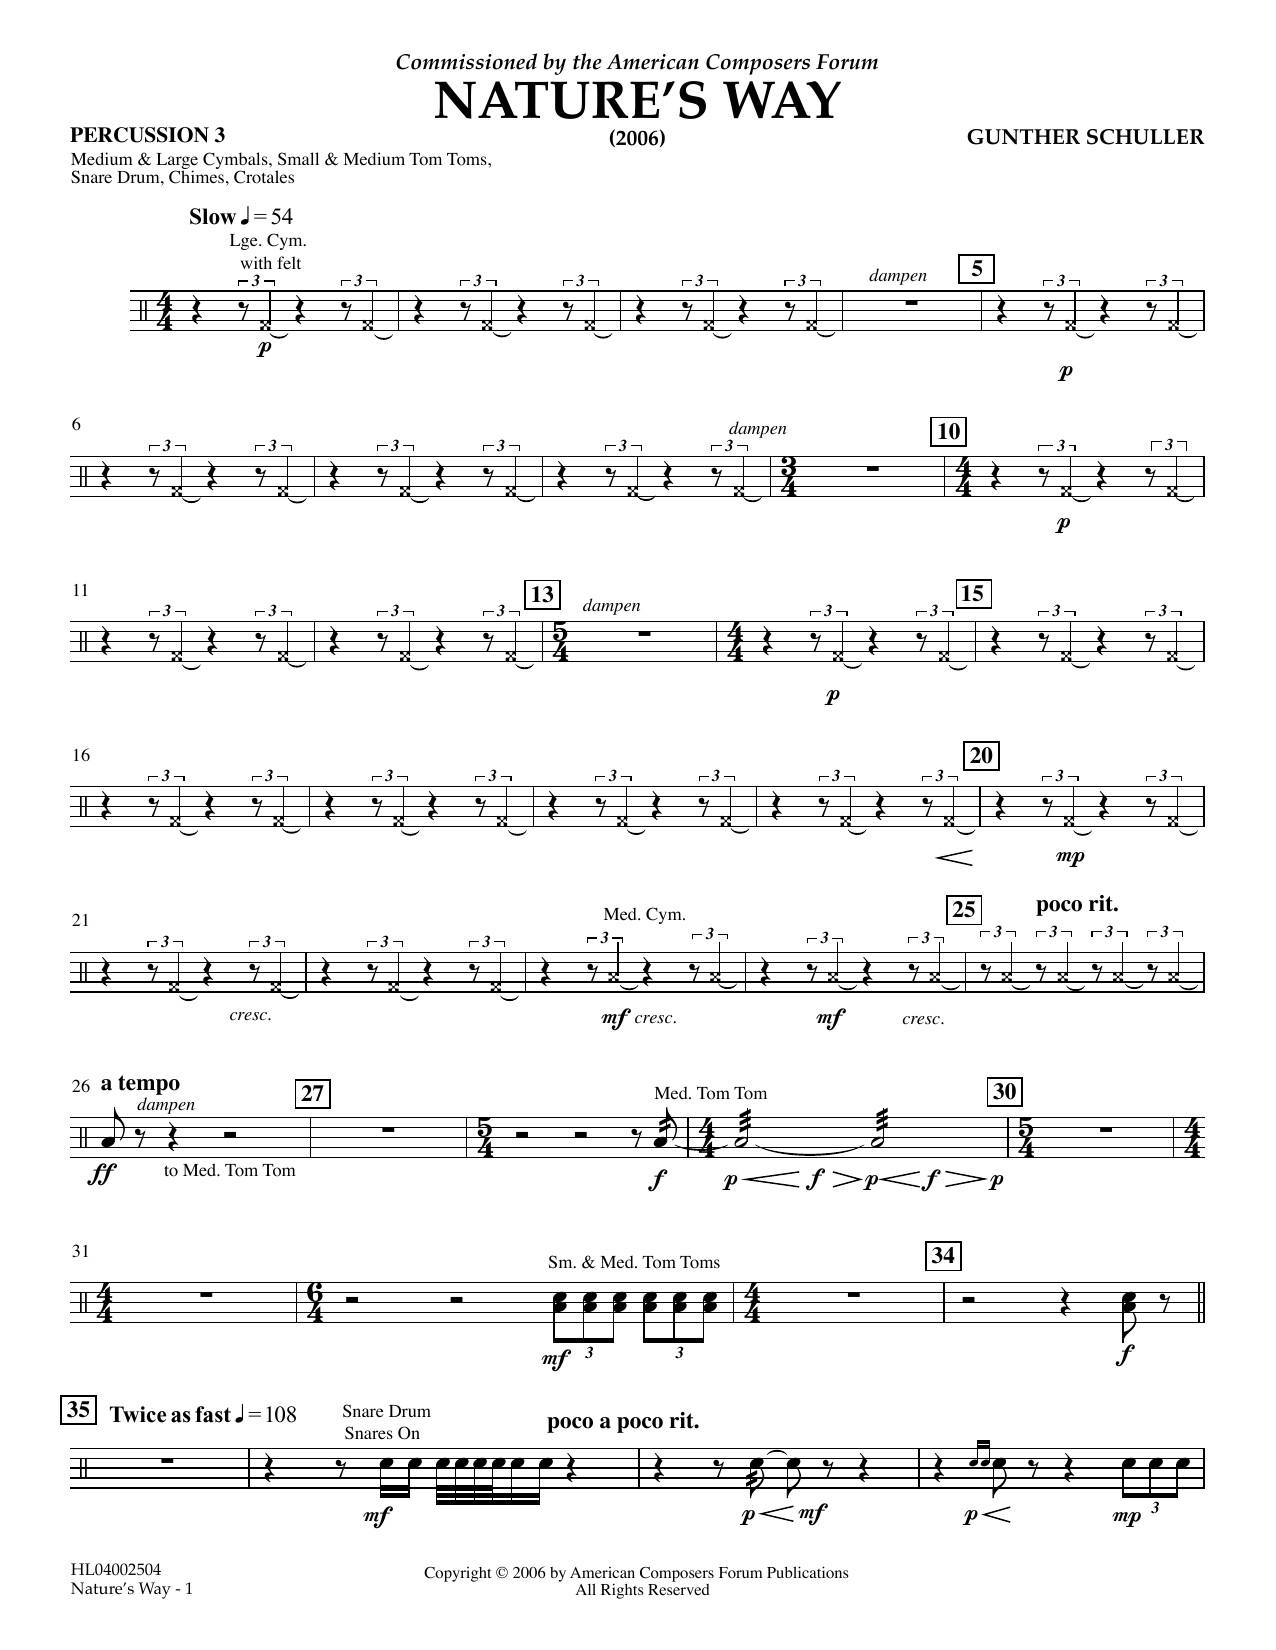 Download Gunther Schuller Nature's Way - Percussion 3 Sheet Music